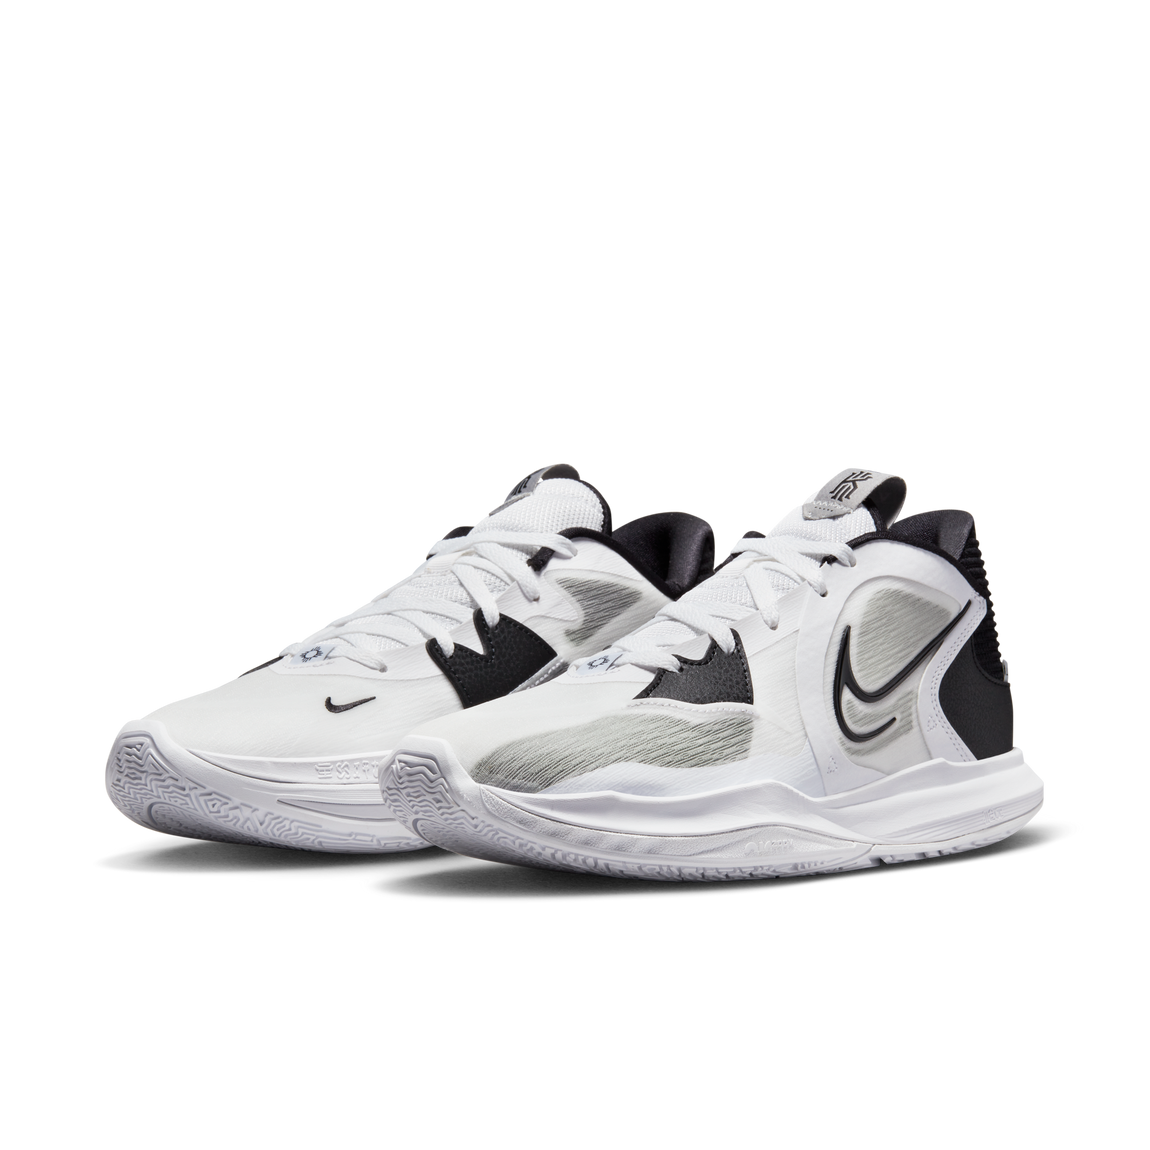 kyrie 5 low white